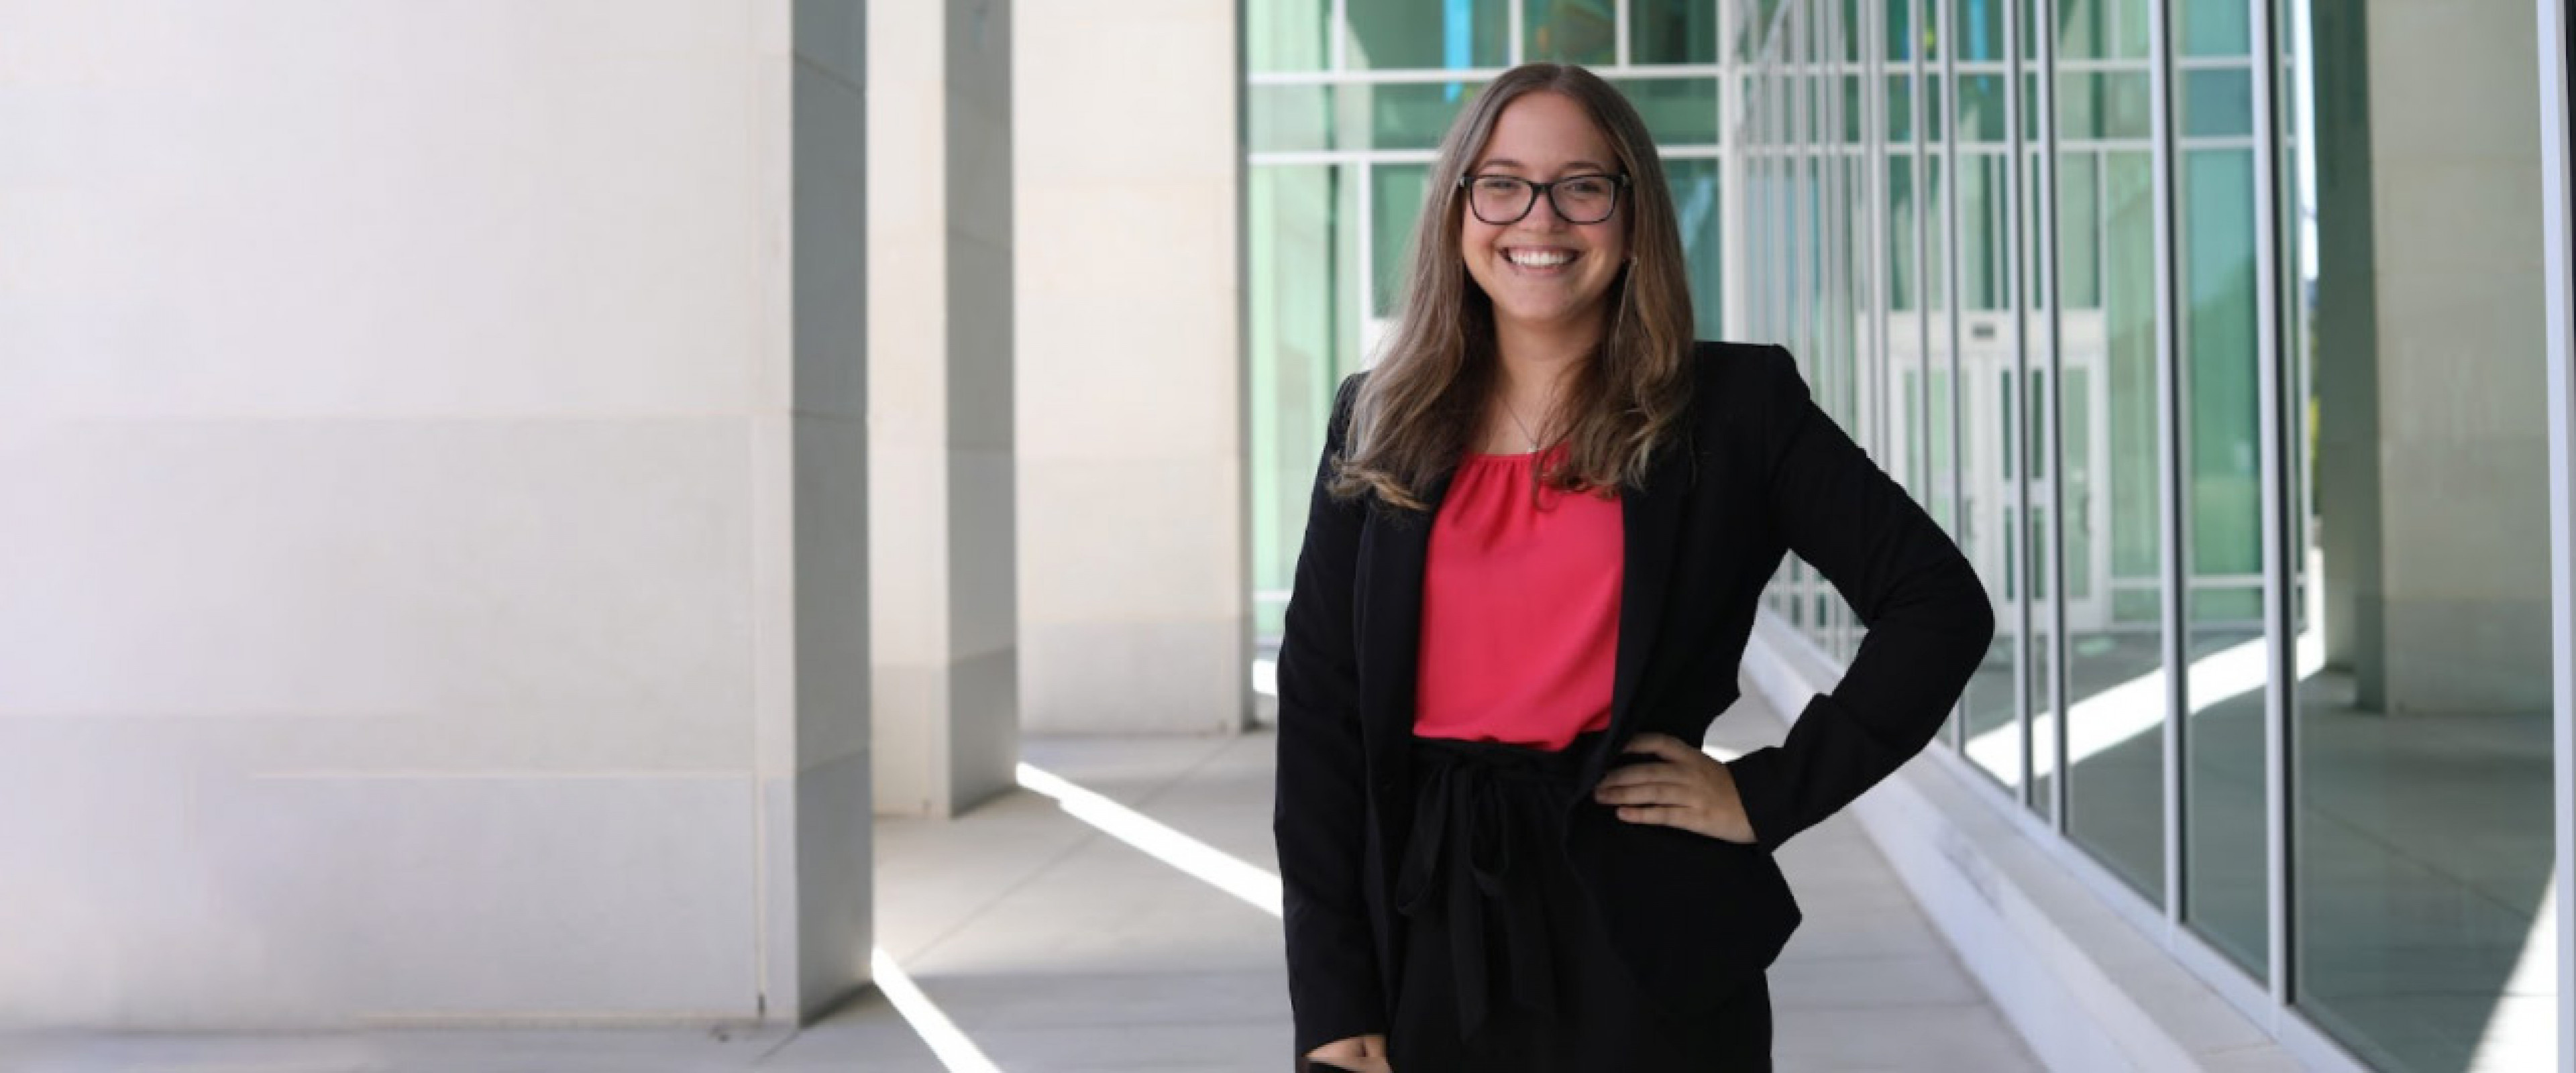 Allison Anker, Presidential Scholar in finance and commercial law, wearing a black jacket and magenta shirt.